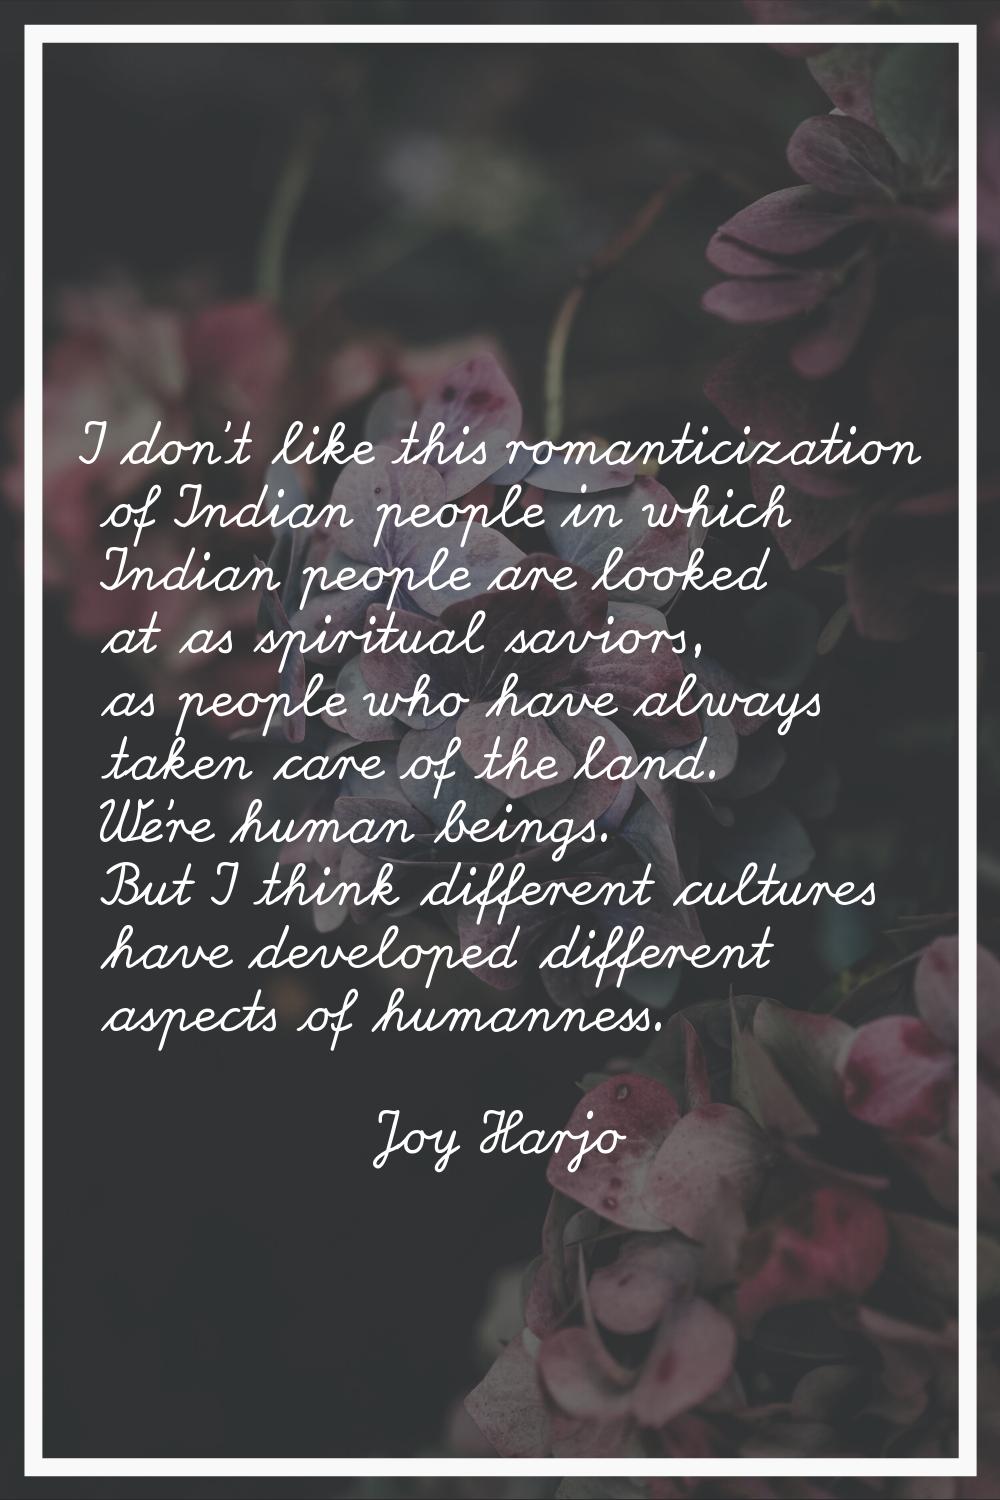 I don't like this romanticization of Indian people in which Indian people are looked at as spiritua